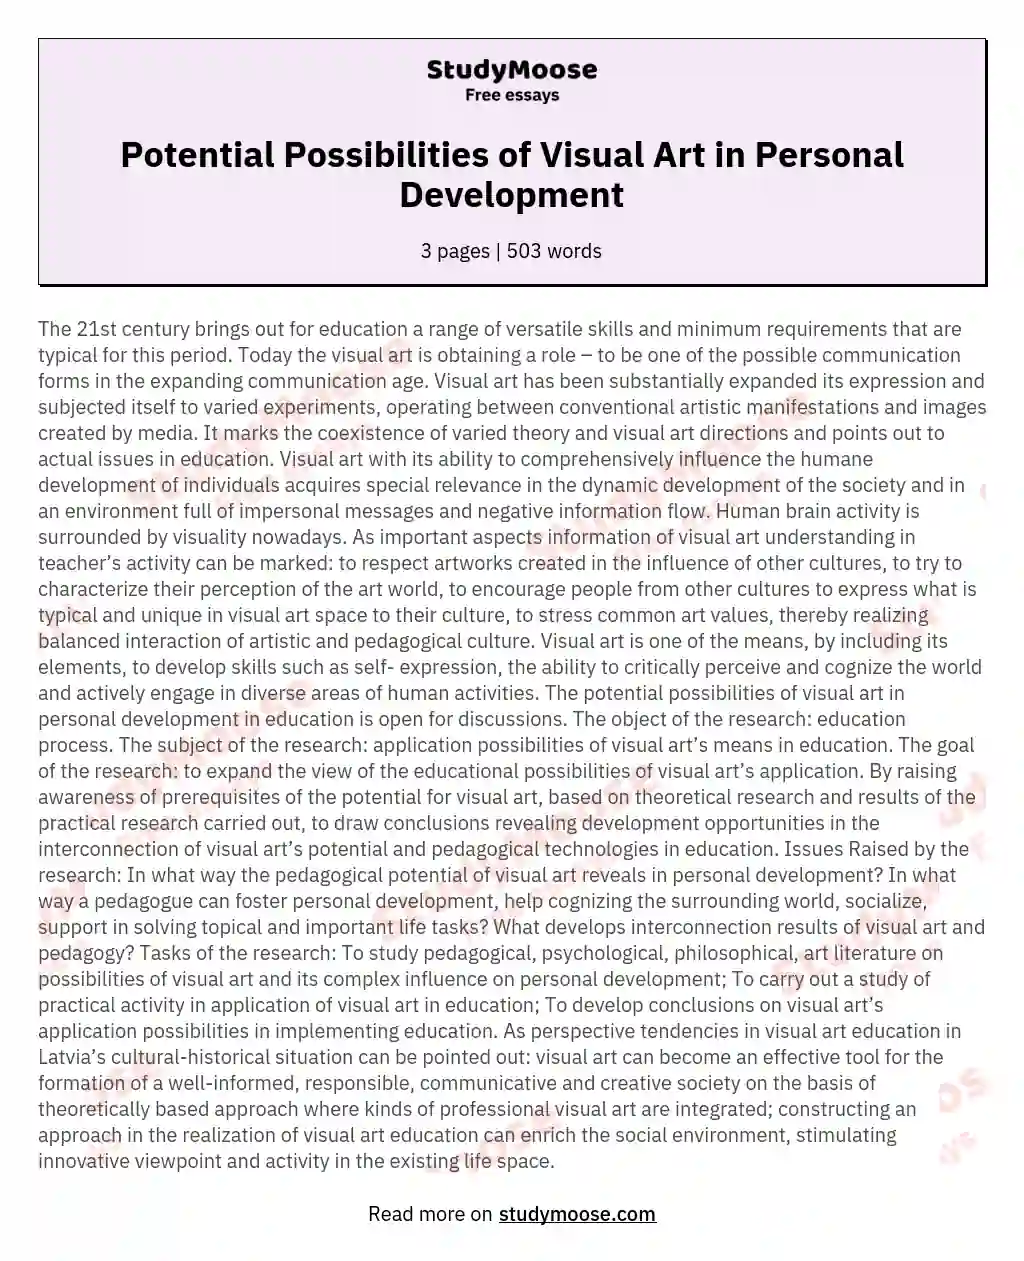 Potential Possibilities of Visual Art in Personal Development essay